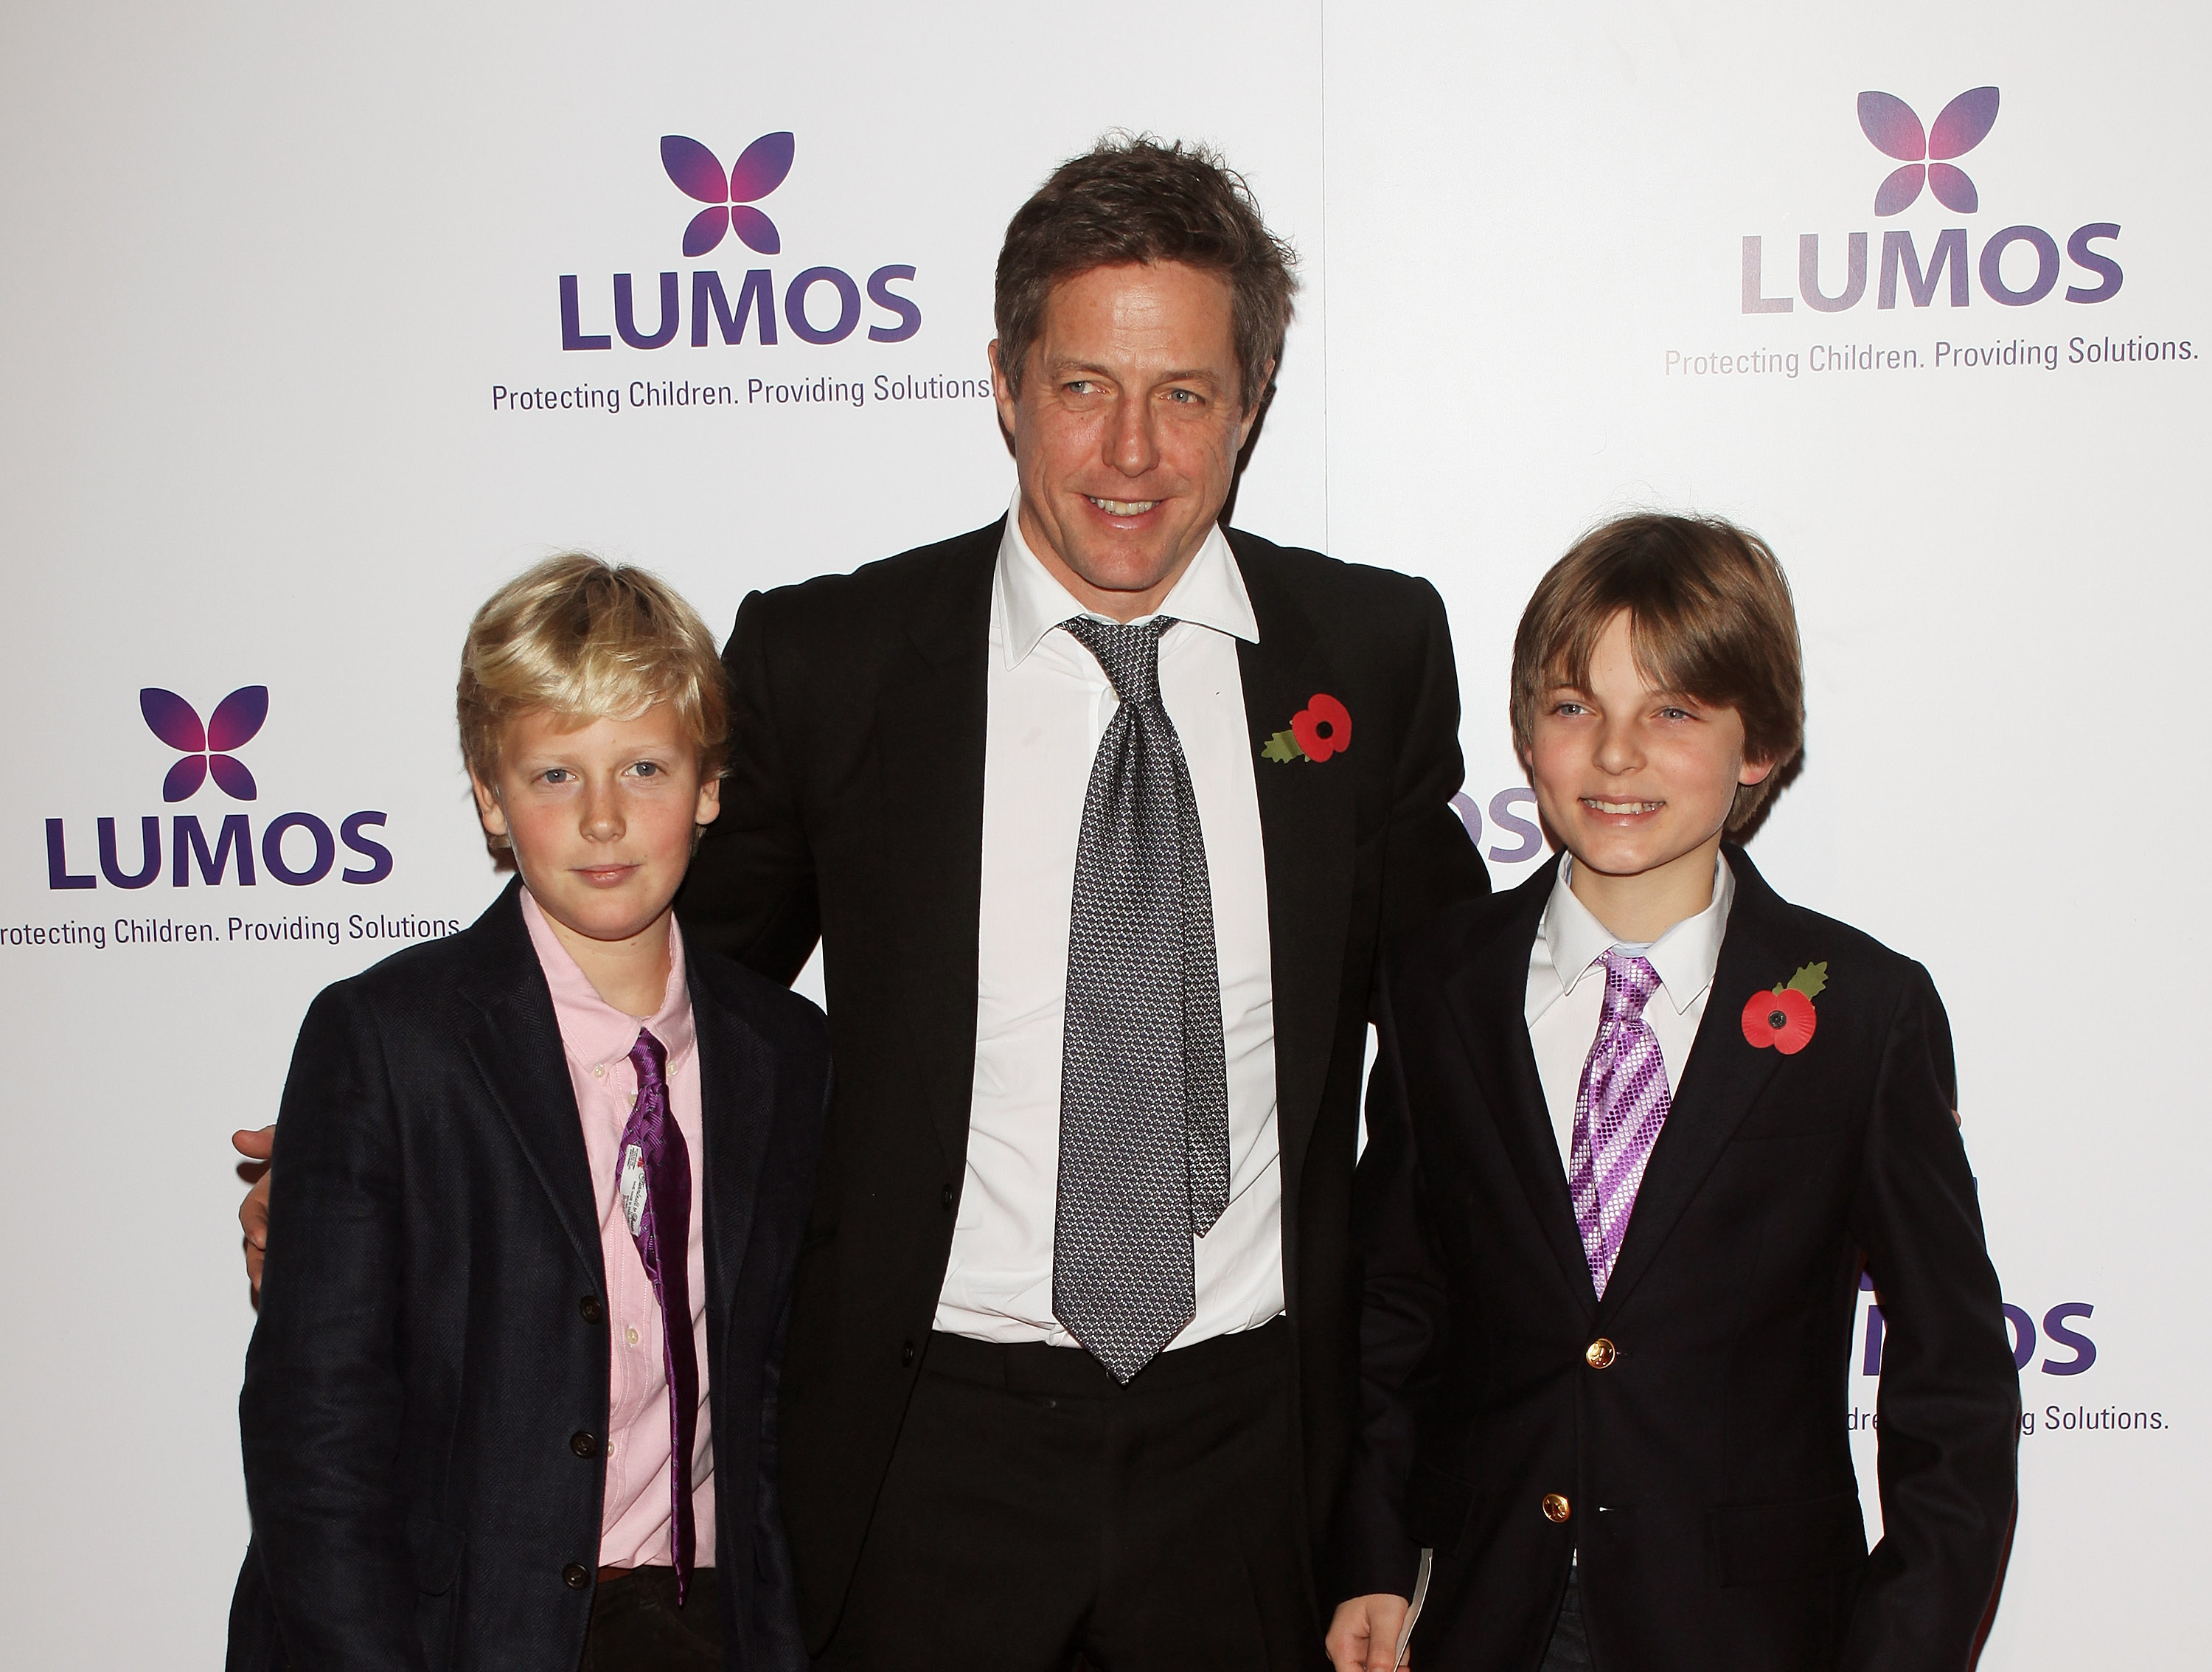 Hugh Grant and Damian Hurley during the Lumos fundraising event on November 9, 2013, in London, England. | Source: Getty Images